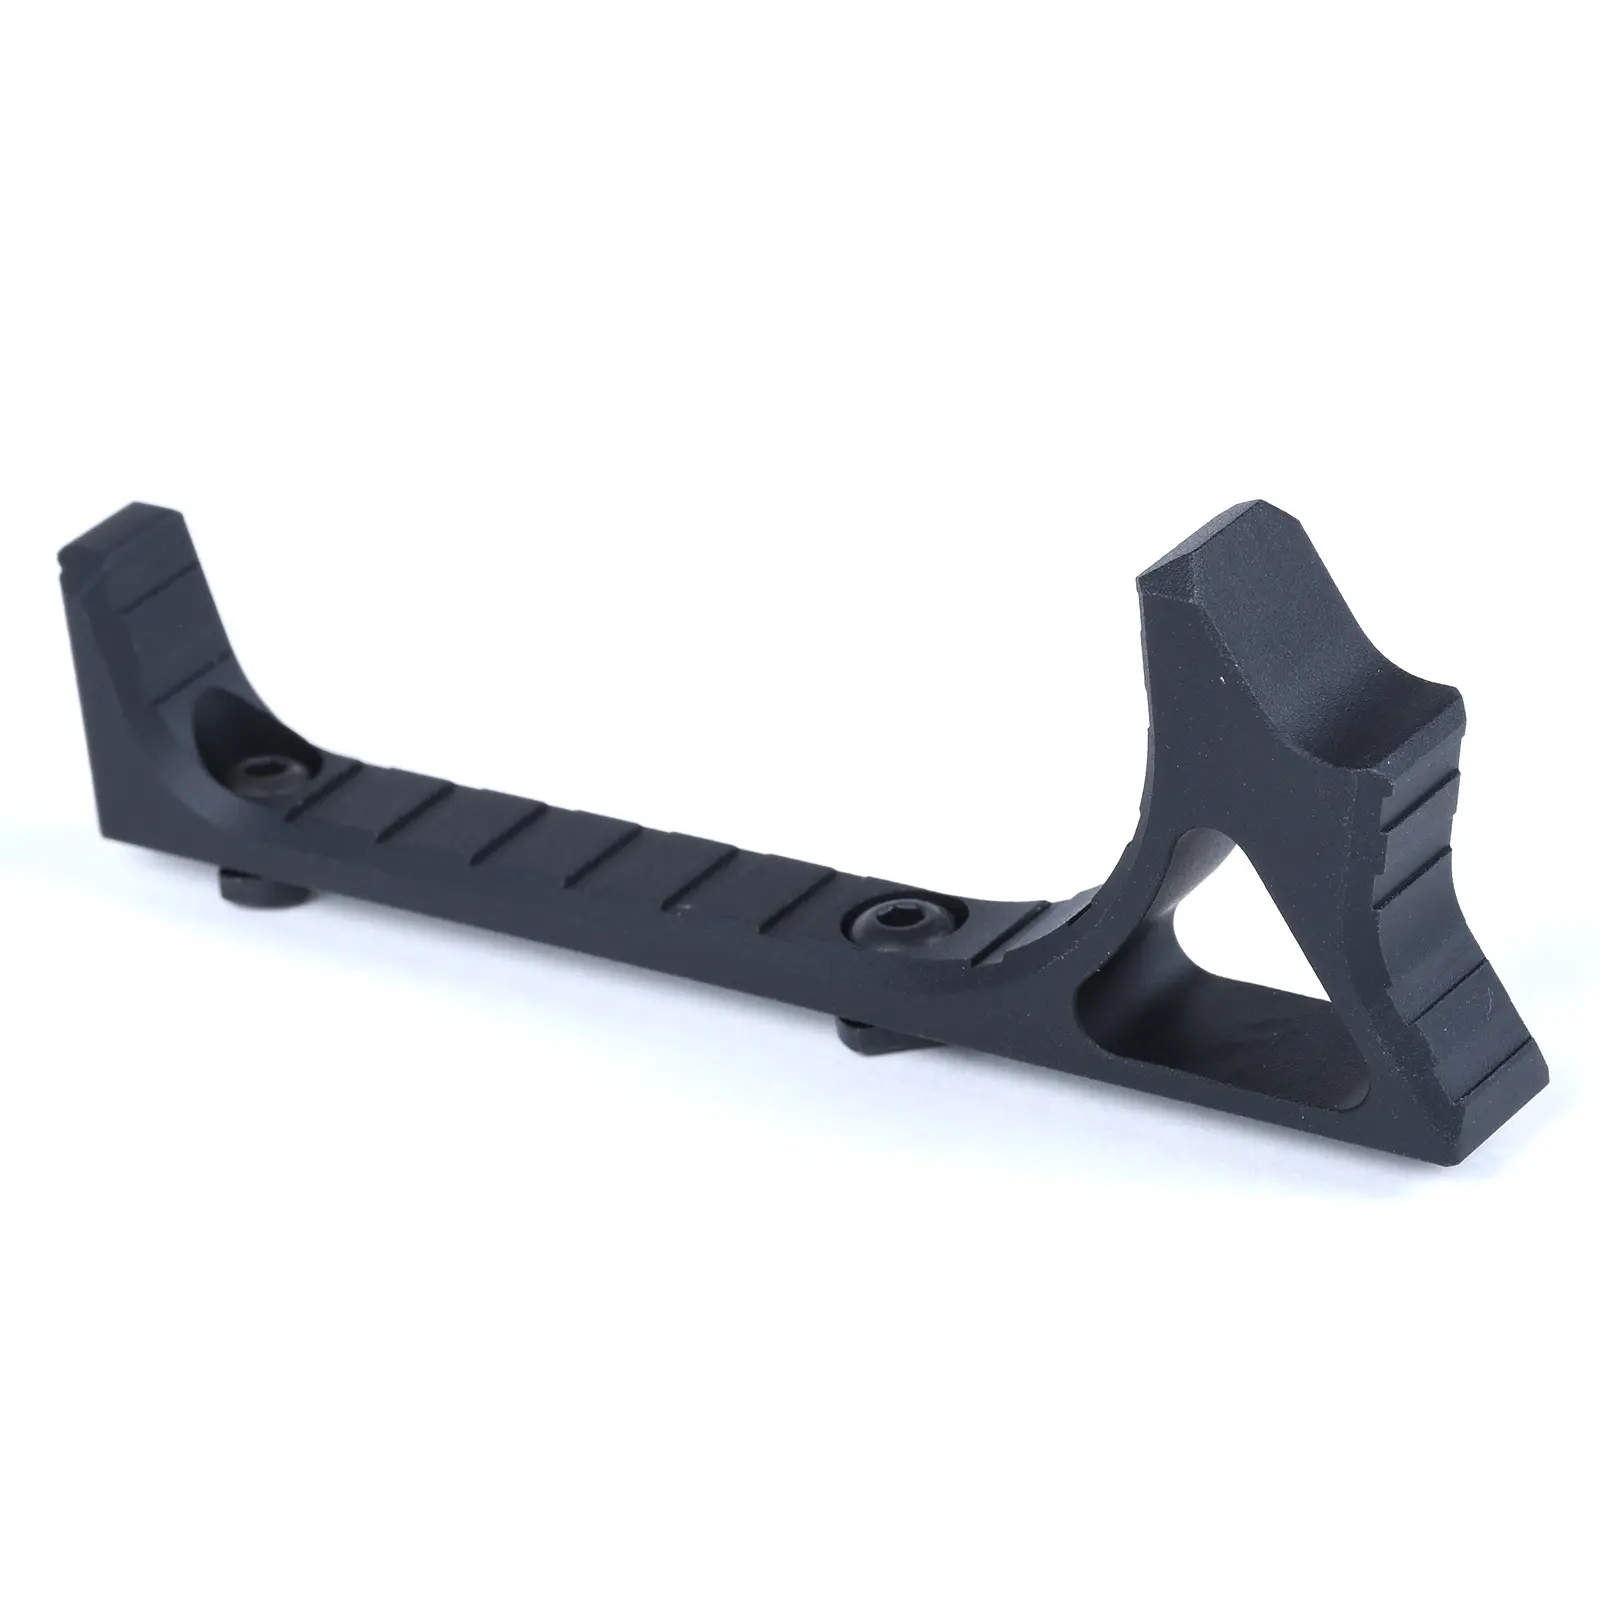 AT3™ AR-15 M-LOK Angled Foregrip – Available in 10 Colors